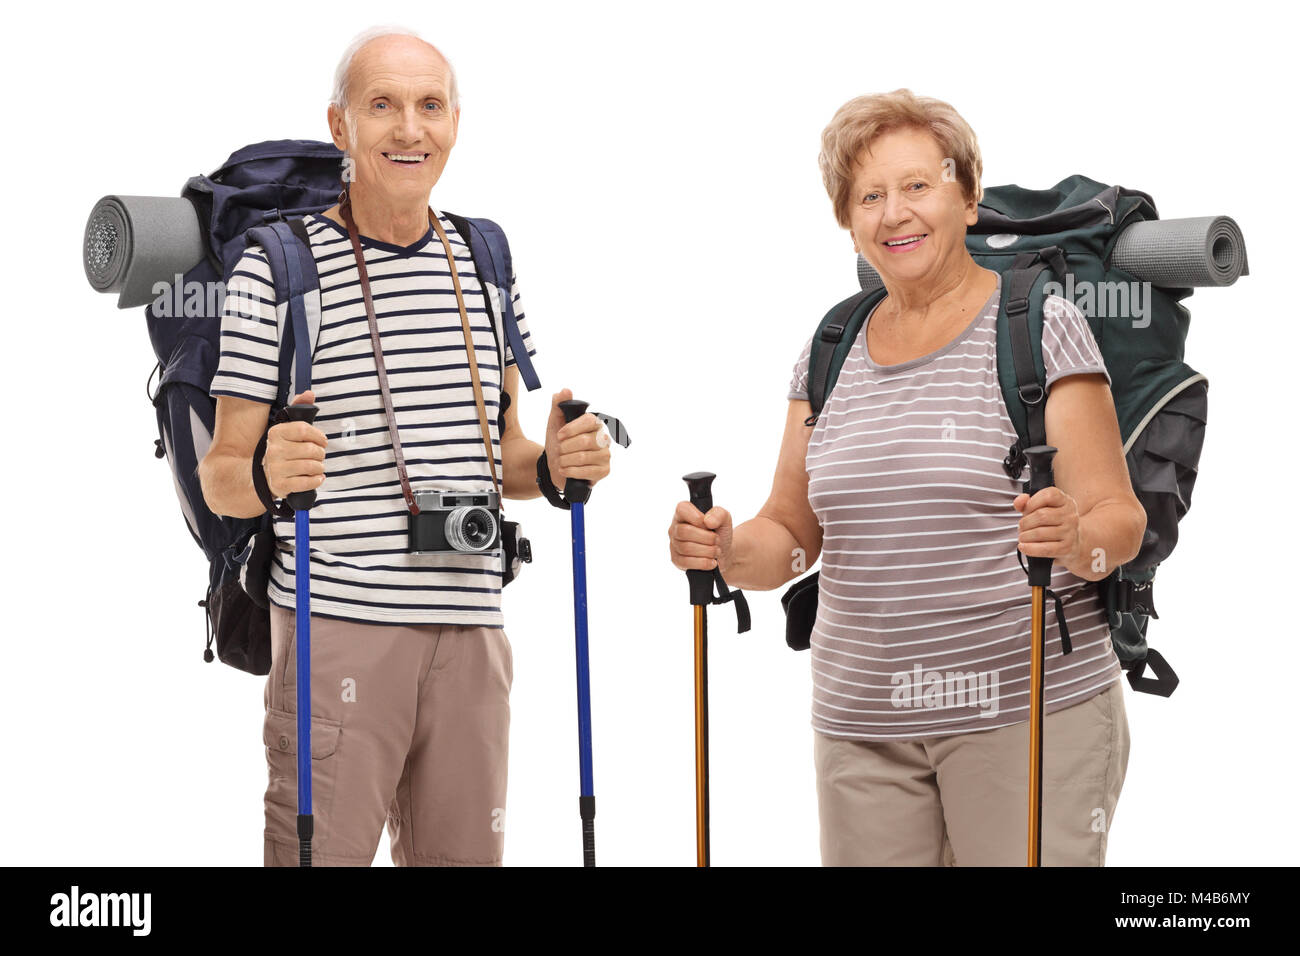 Elderly hikers looking at the camera and smiling isolated on white background Stock Photo